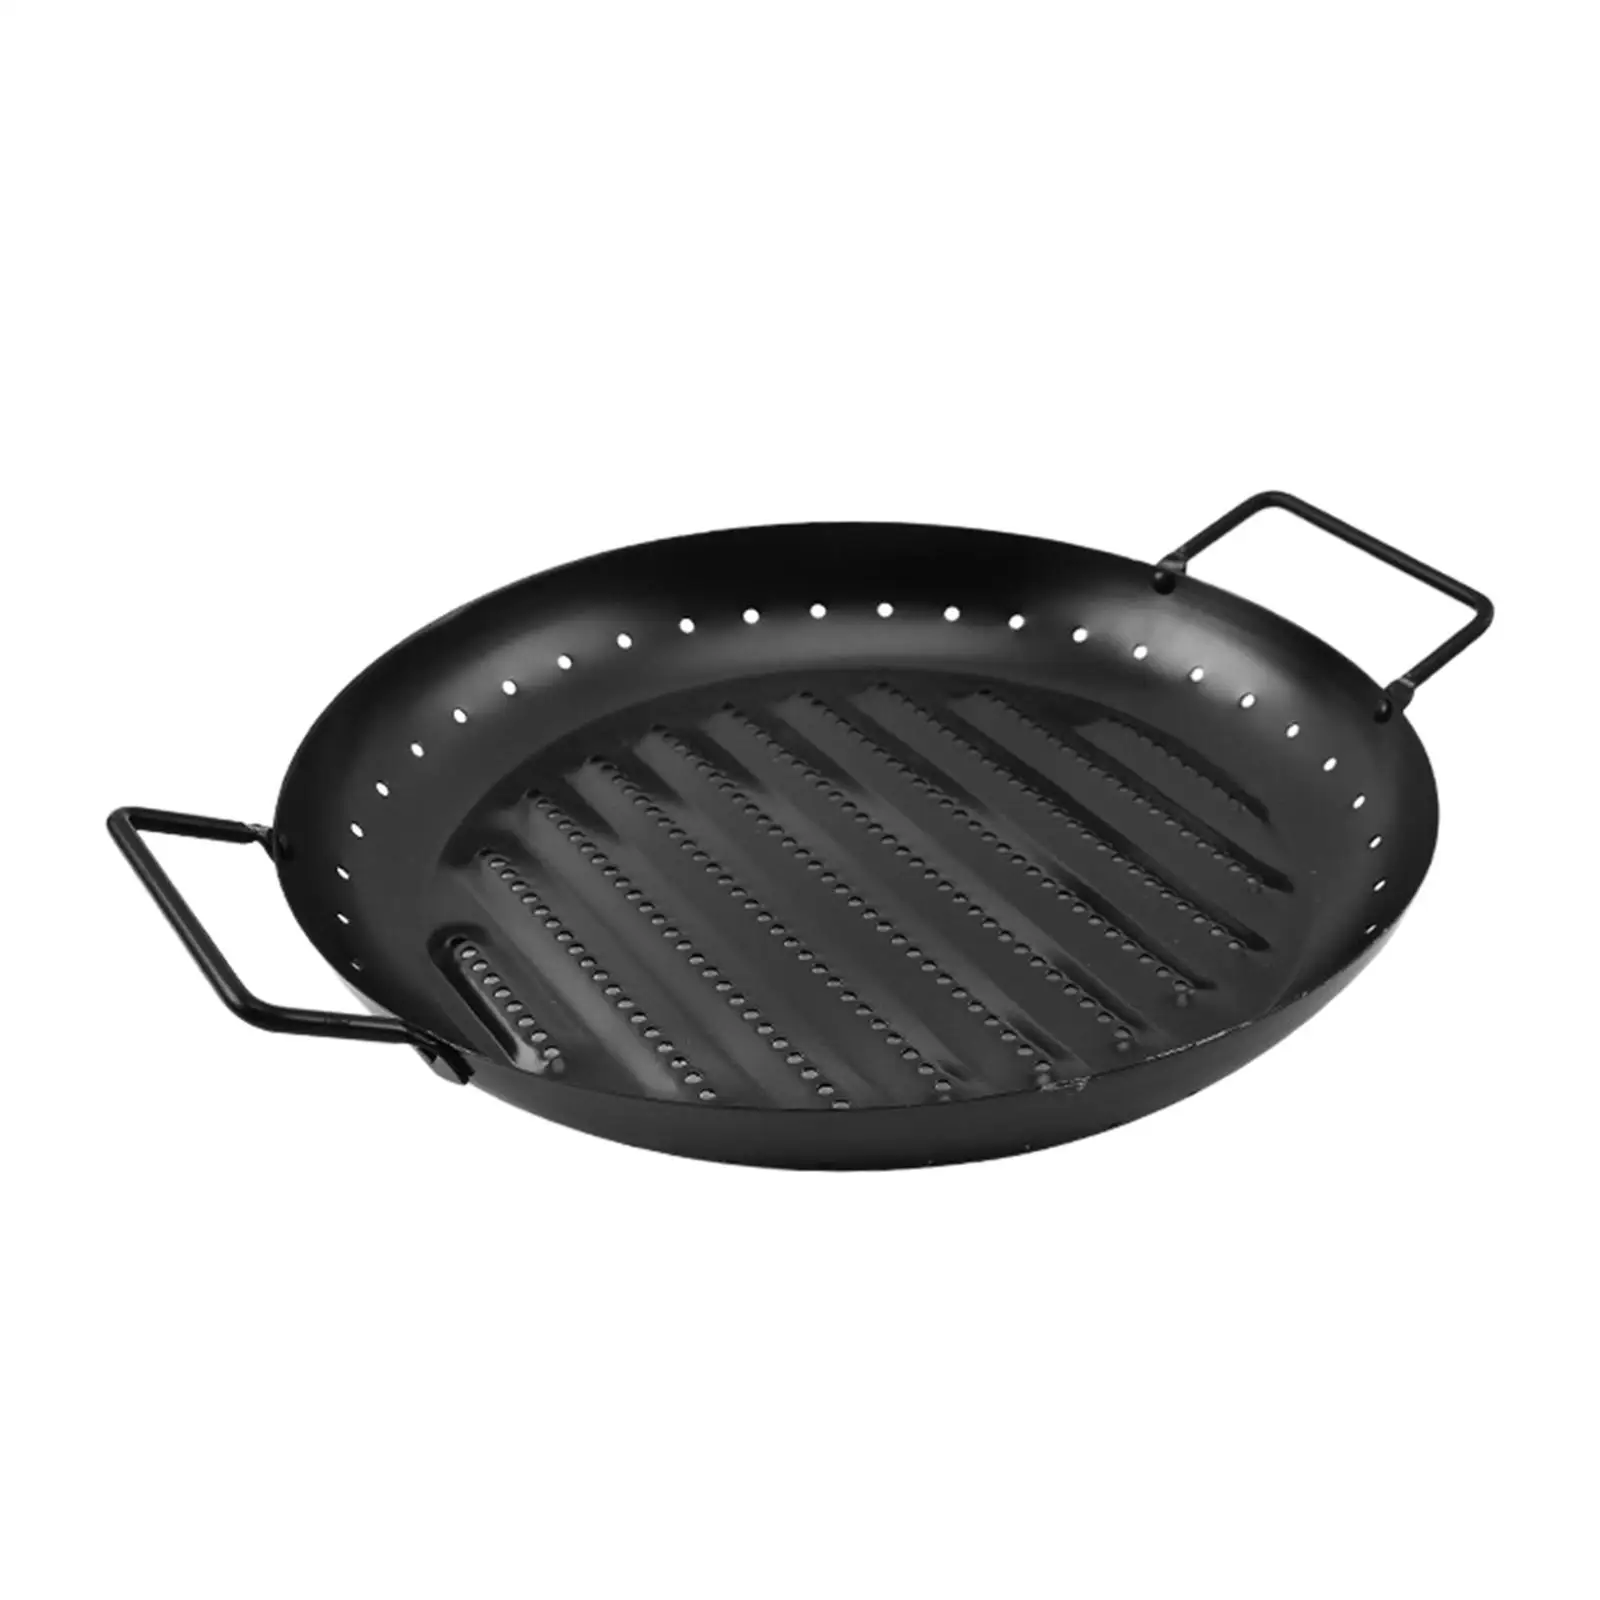 Grill Tray Grill Basket Durable with Handle, Grill Topper Pans for BBQ, Restaurant